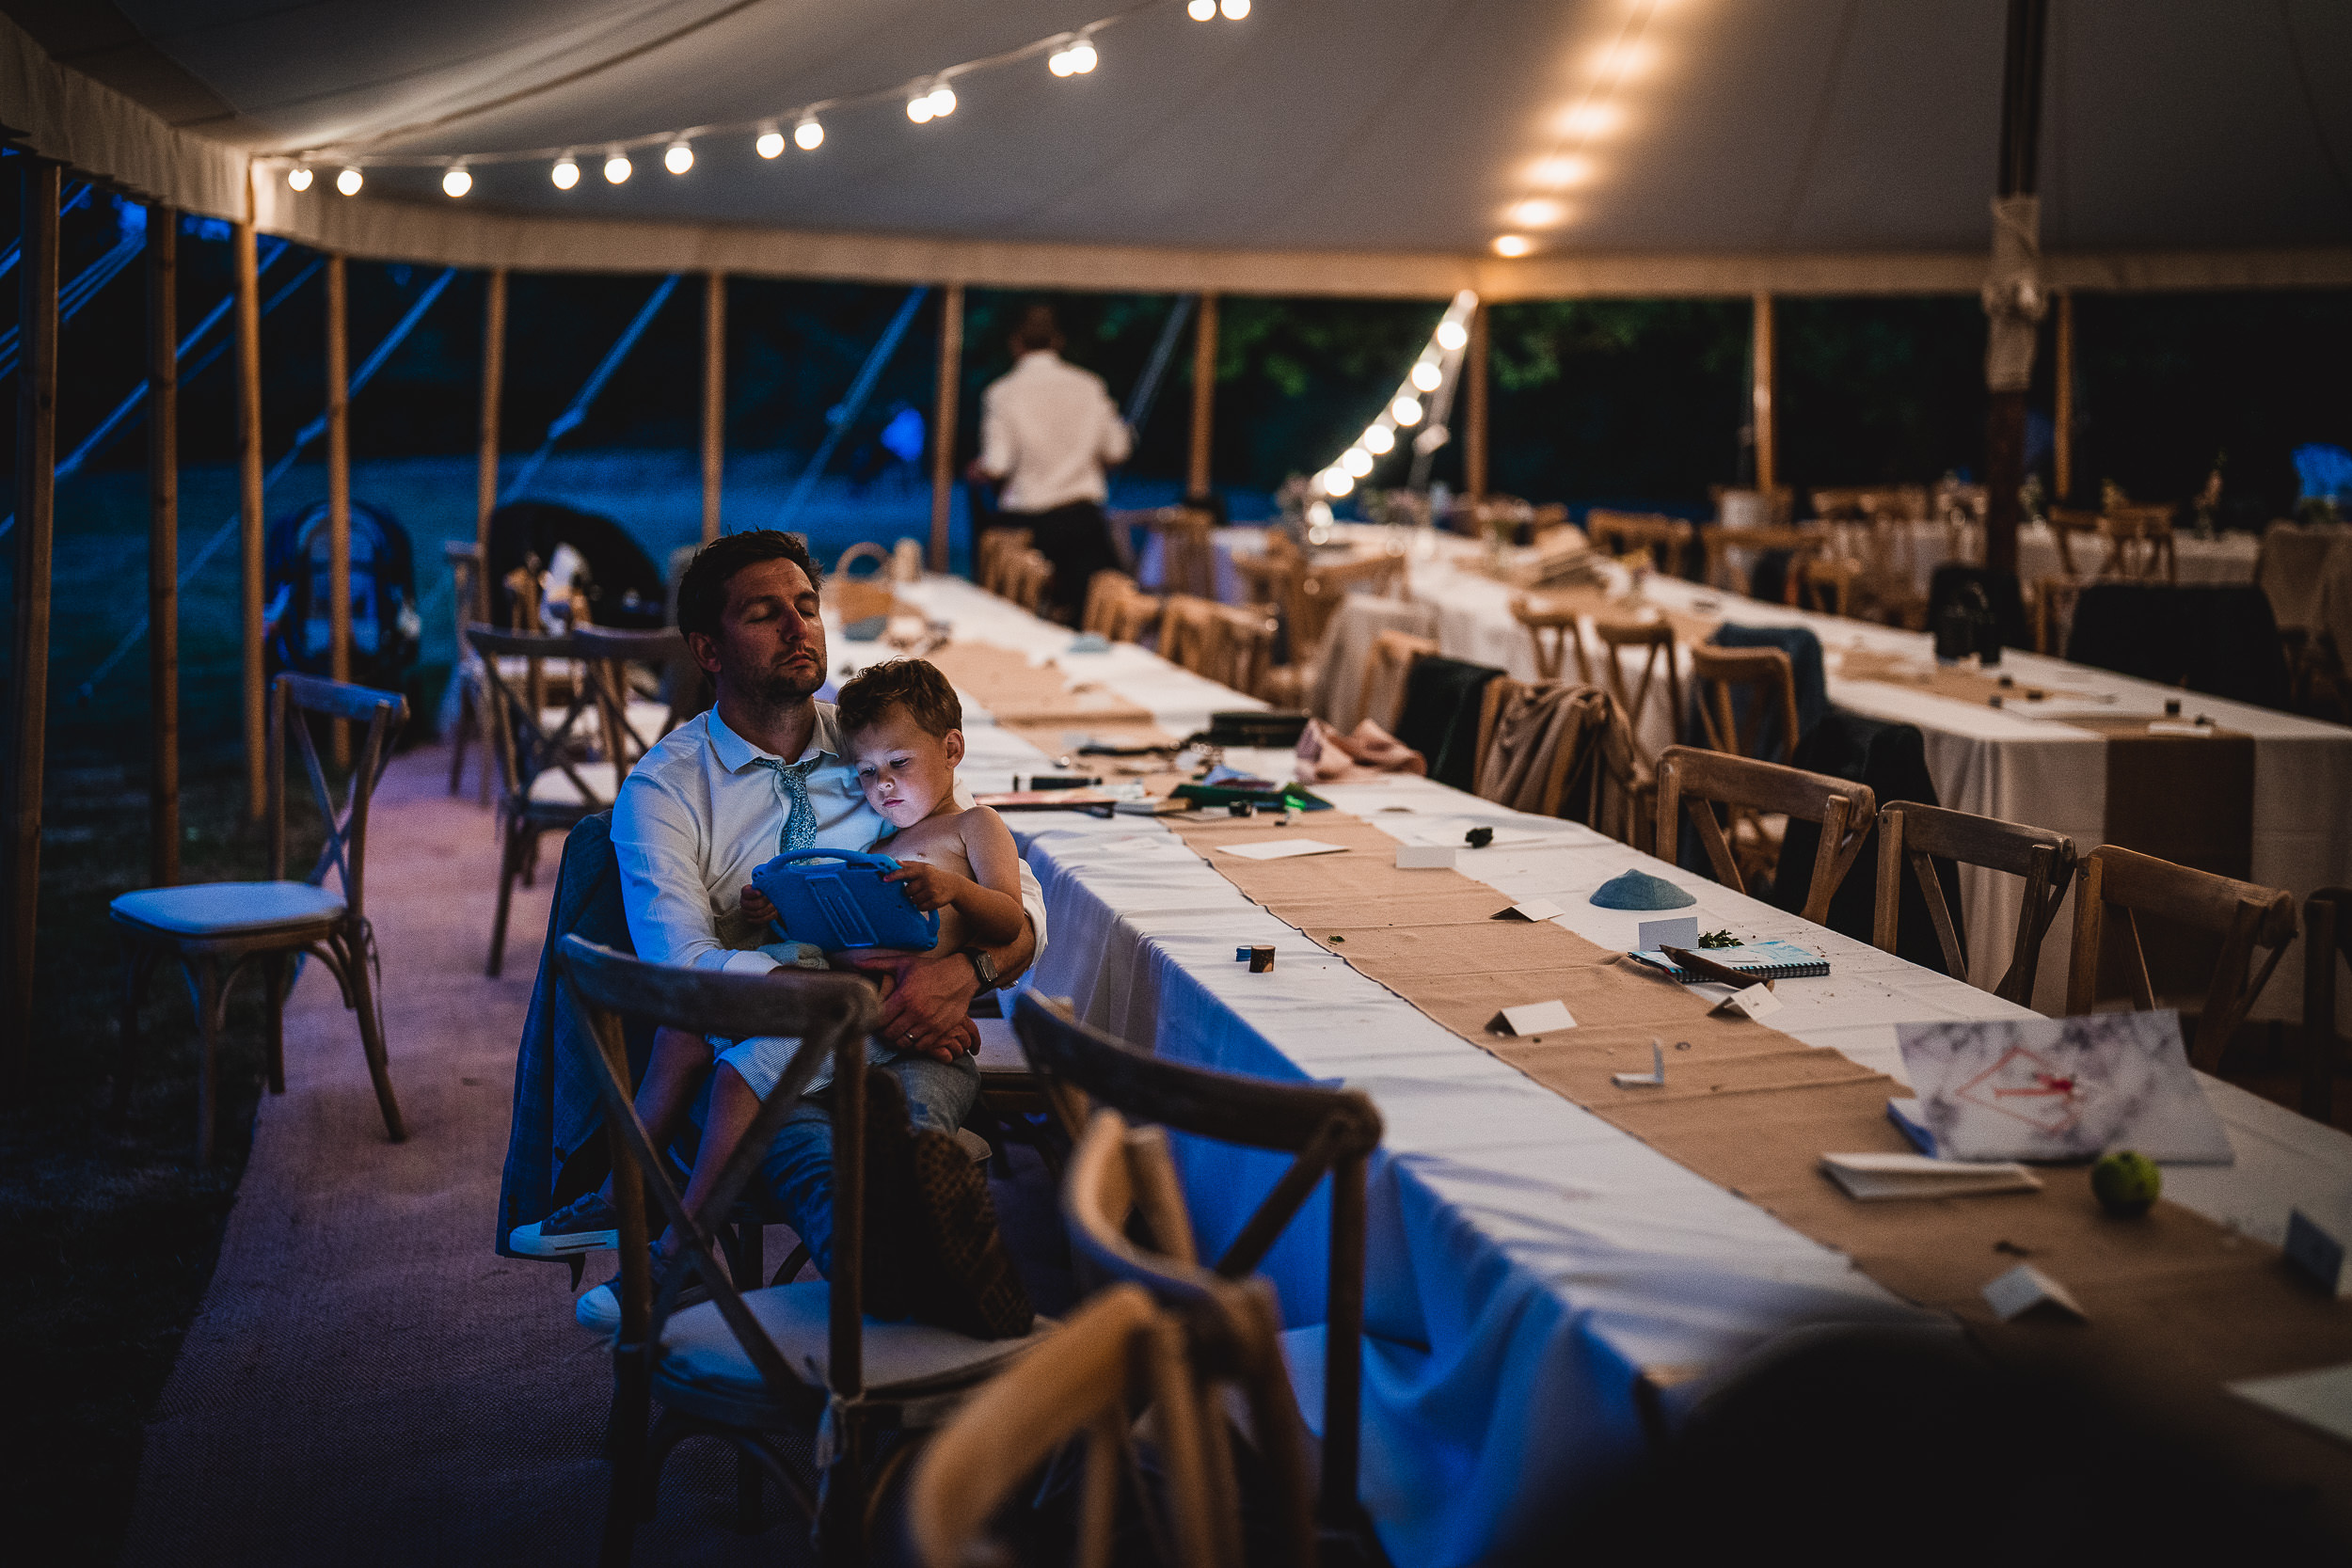 A bride and groom captured in a wedding photo, sitting together at a table inside a tent.